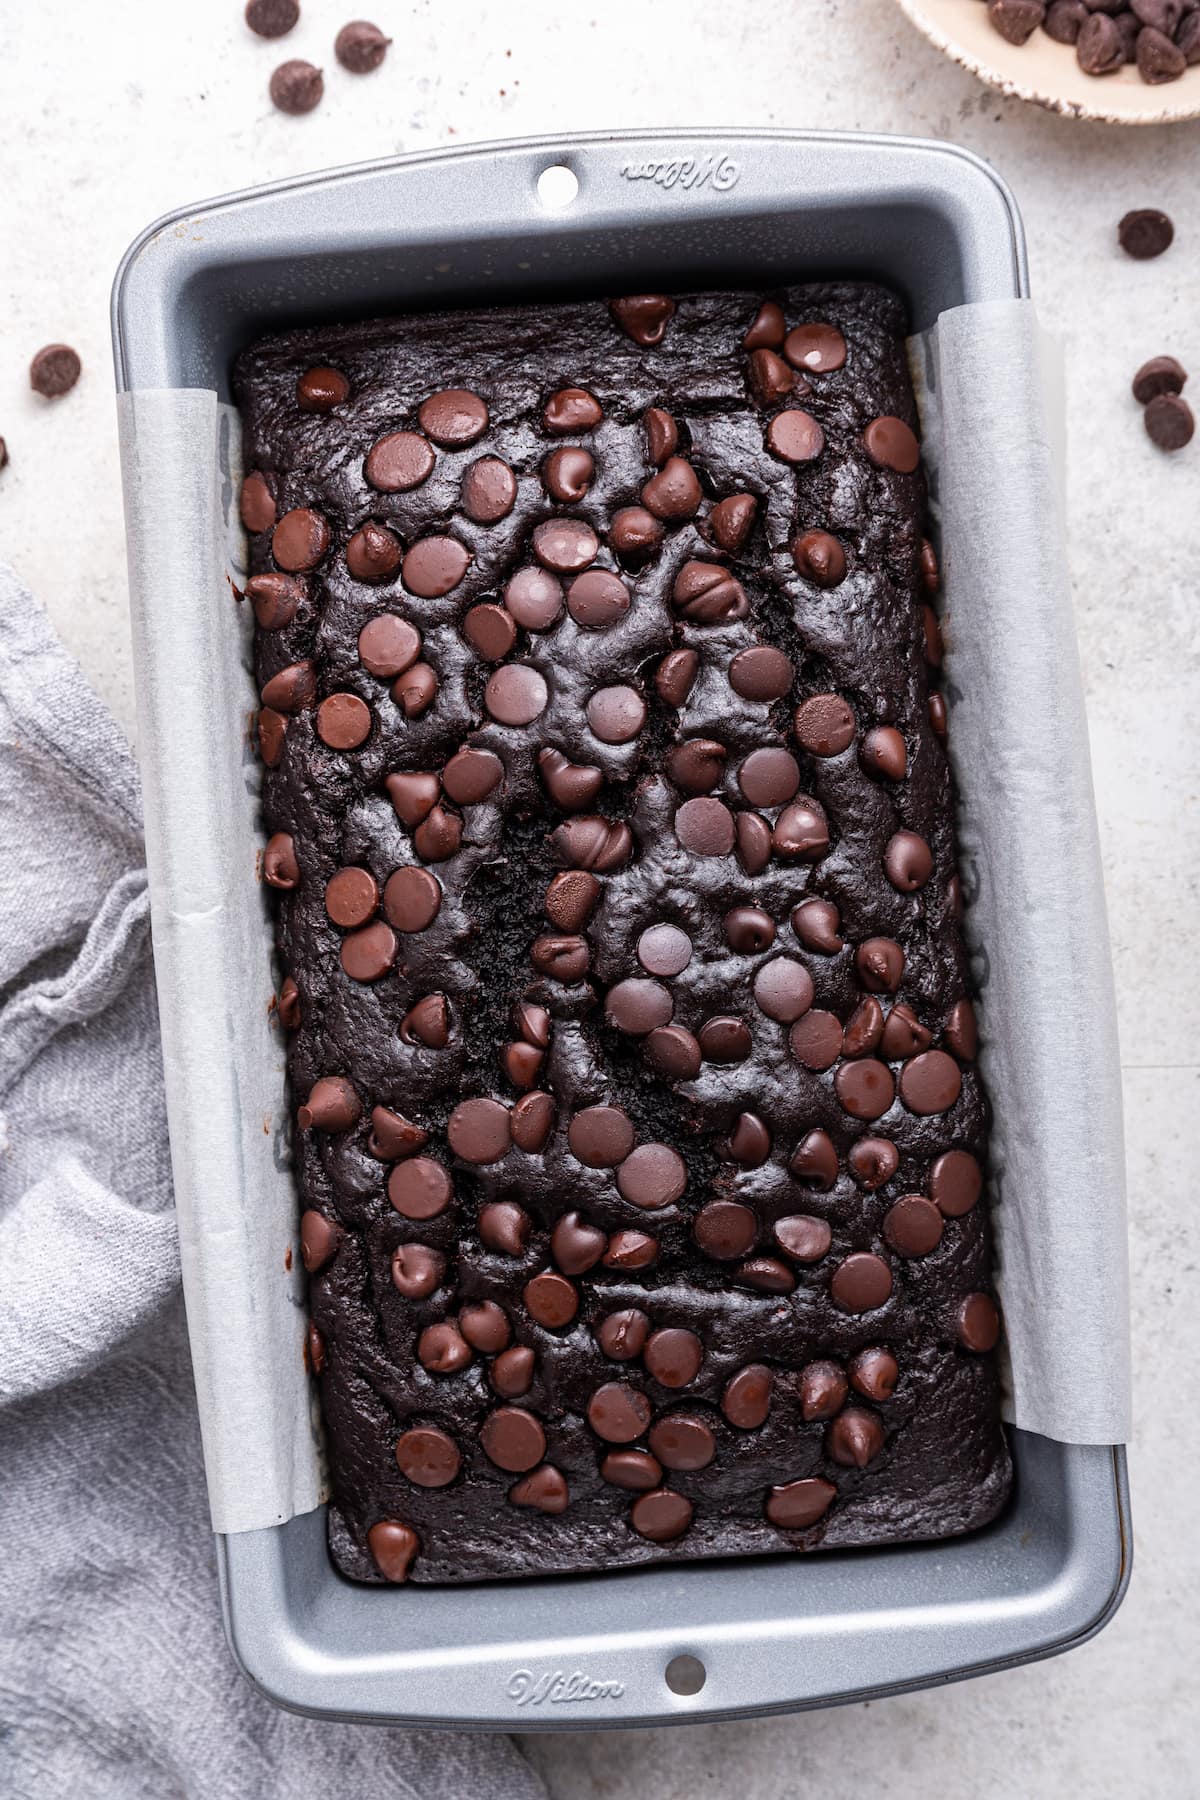 Baked chocolate banana bread loaf in a pan.